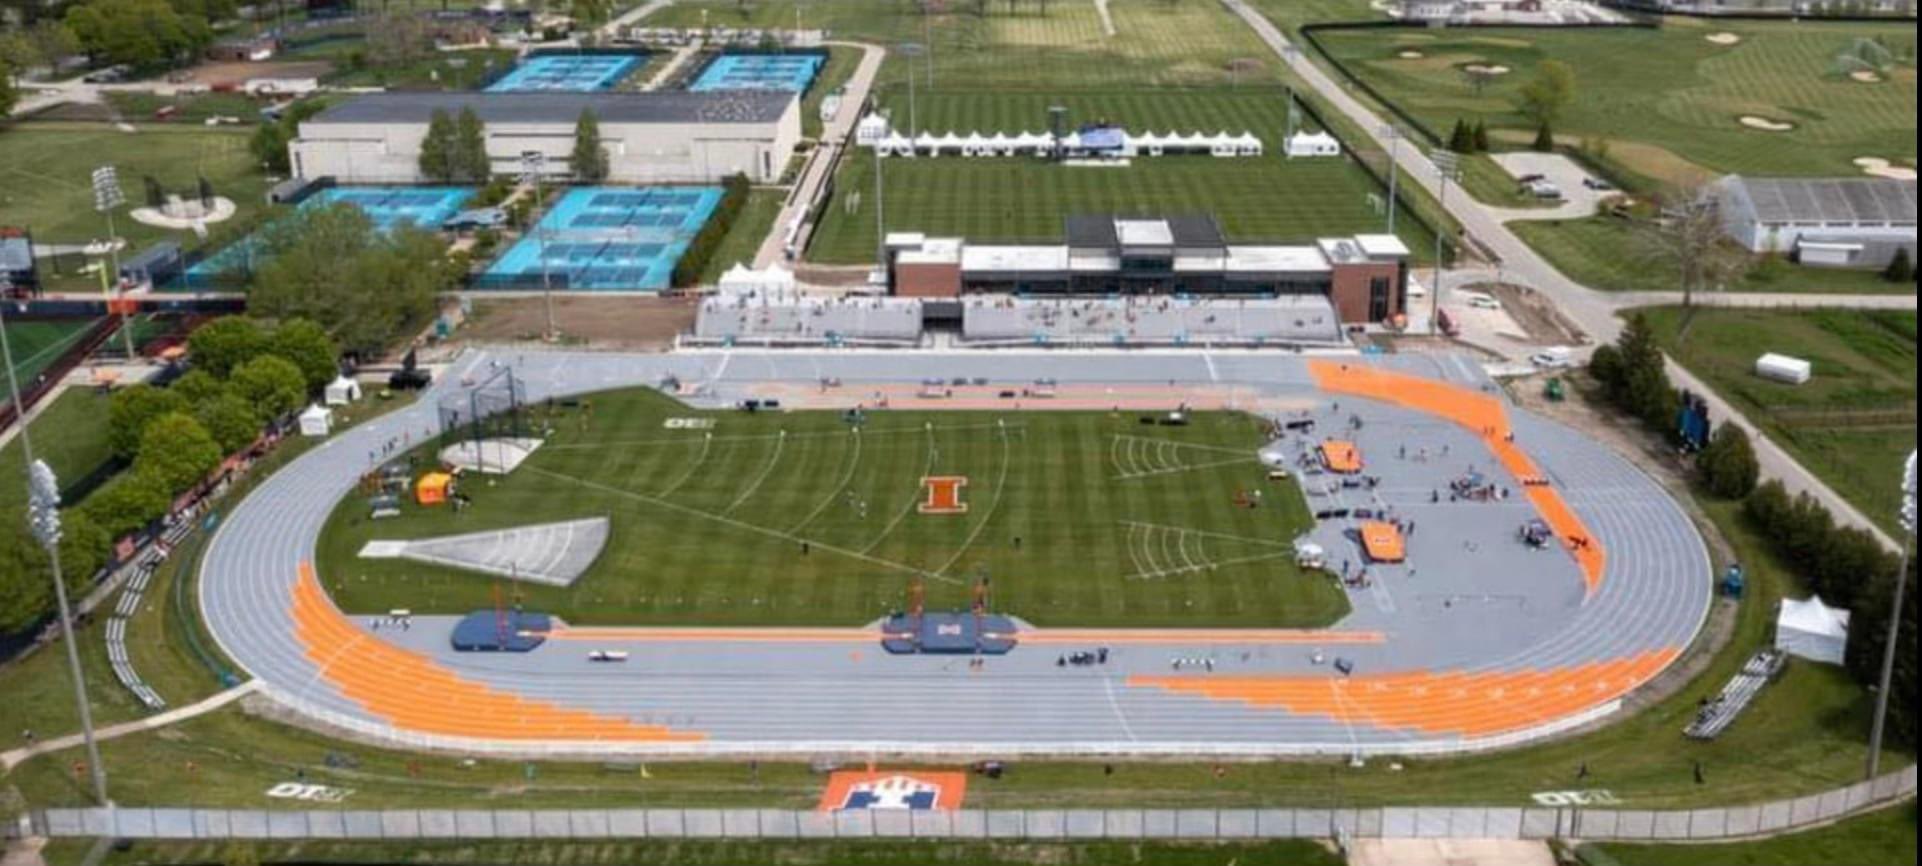 An arial shot of the Gary Wieneke track. It is gray and orange with a a grassy area in the middle.